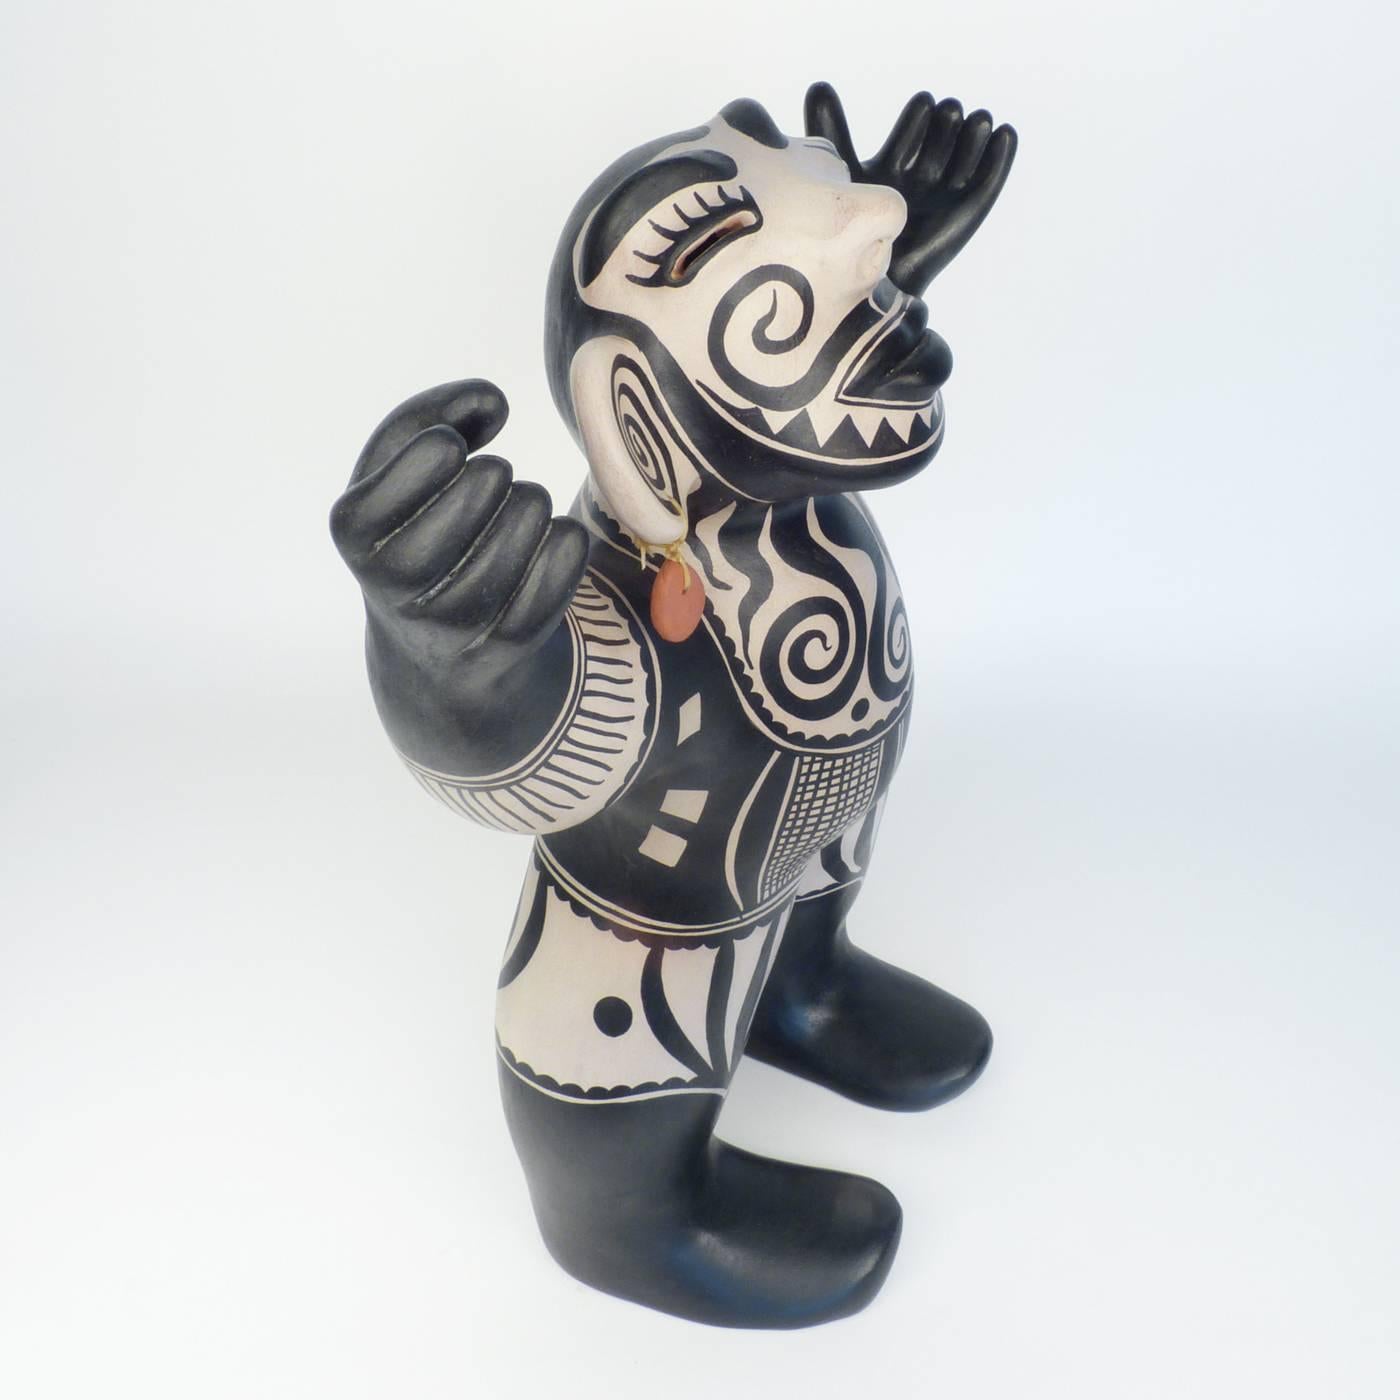 Internationally acclaimed Cochiti Pueblo artist Virgil Ortiz comes from a long line of Native American potters. He draws on artistic traditions and local histories to create contemporary pottery that appeals to a global market while remaining firmly